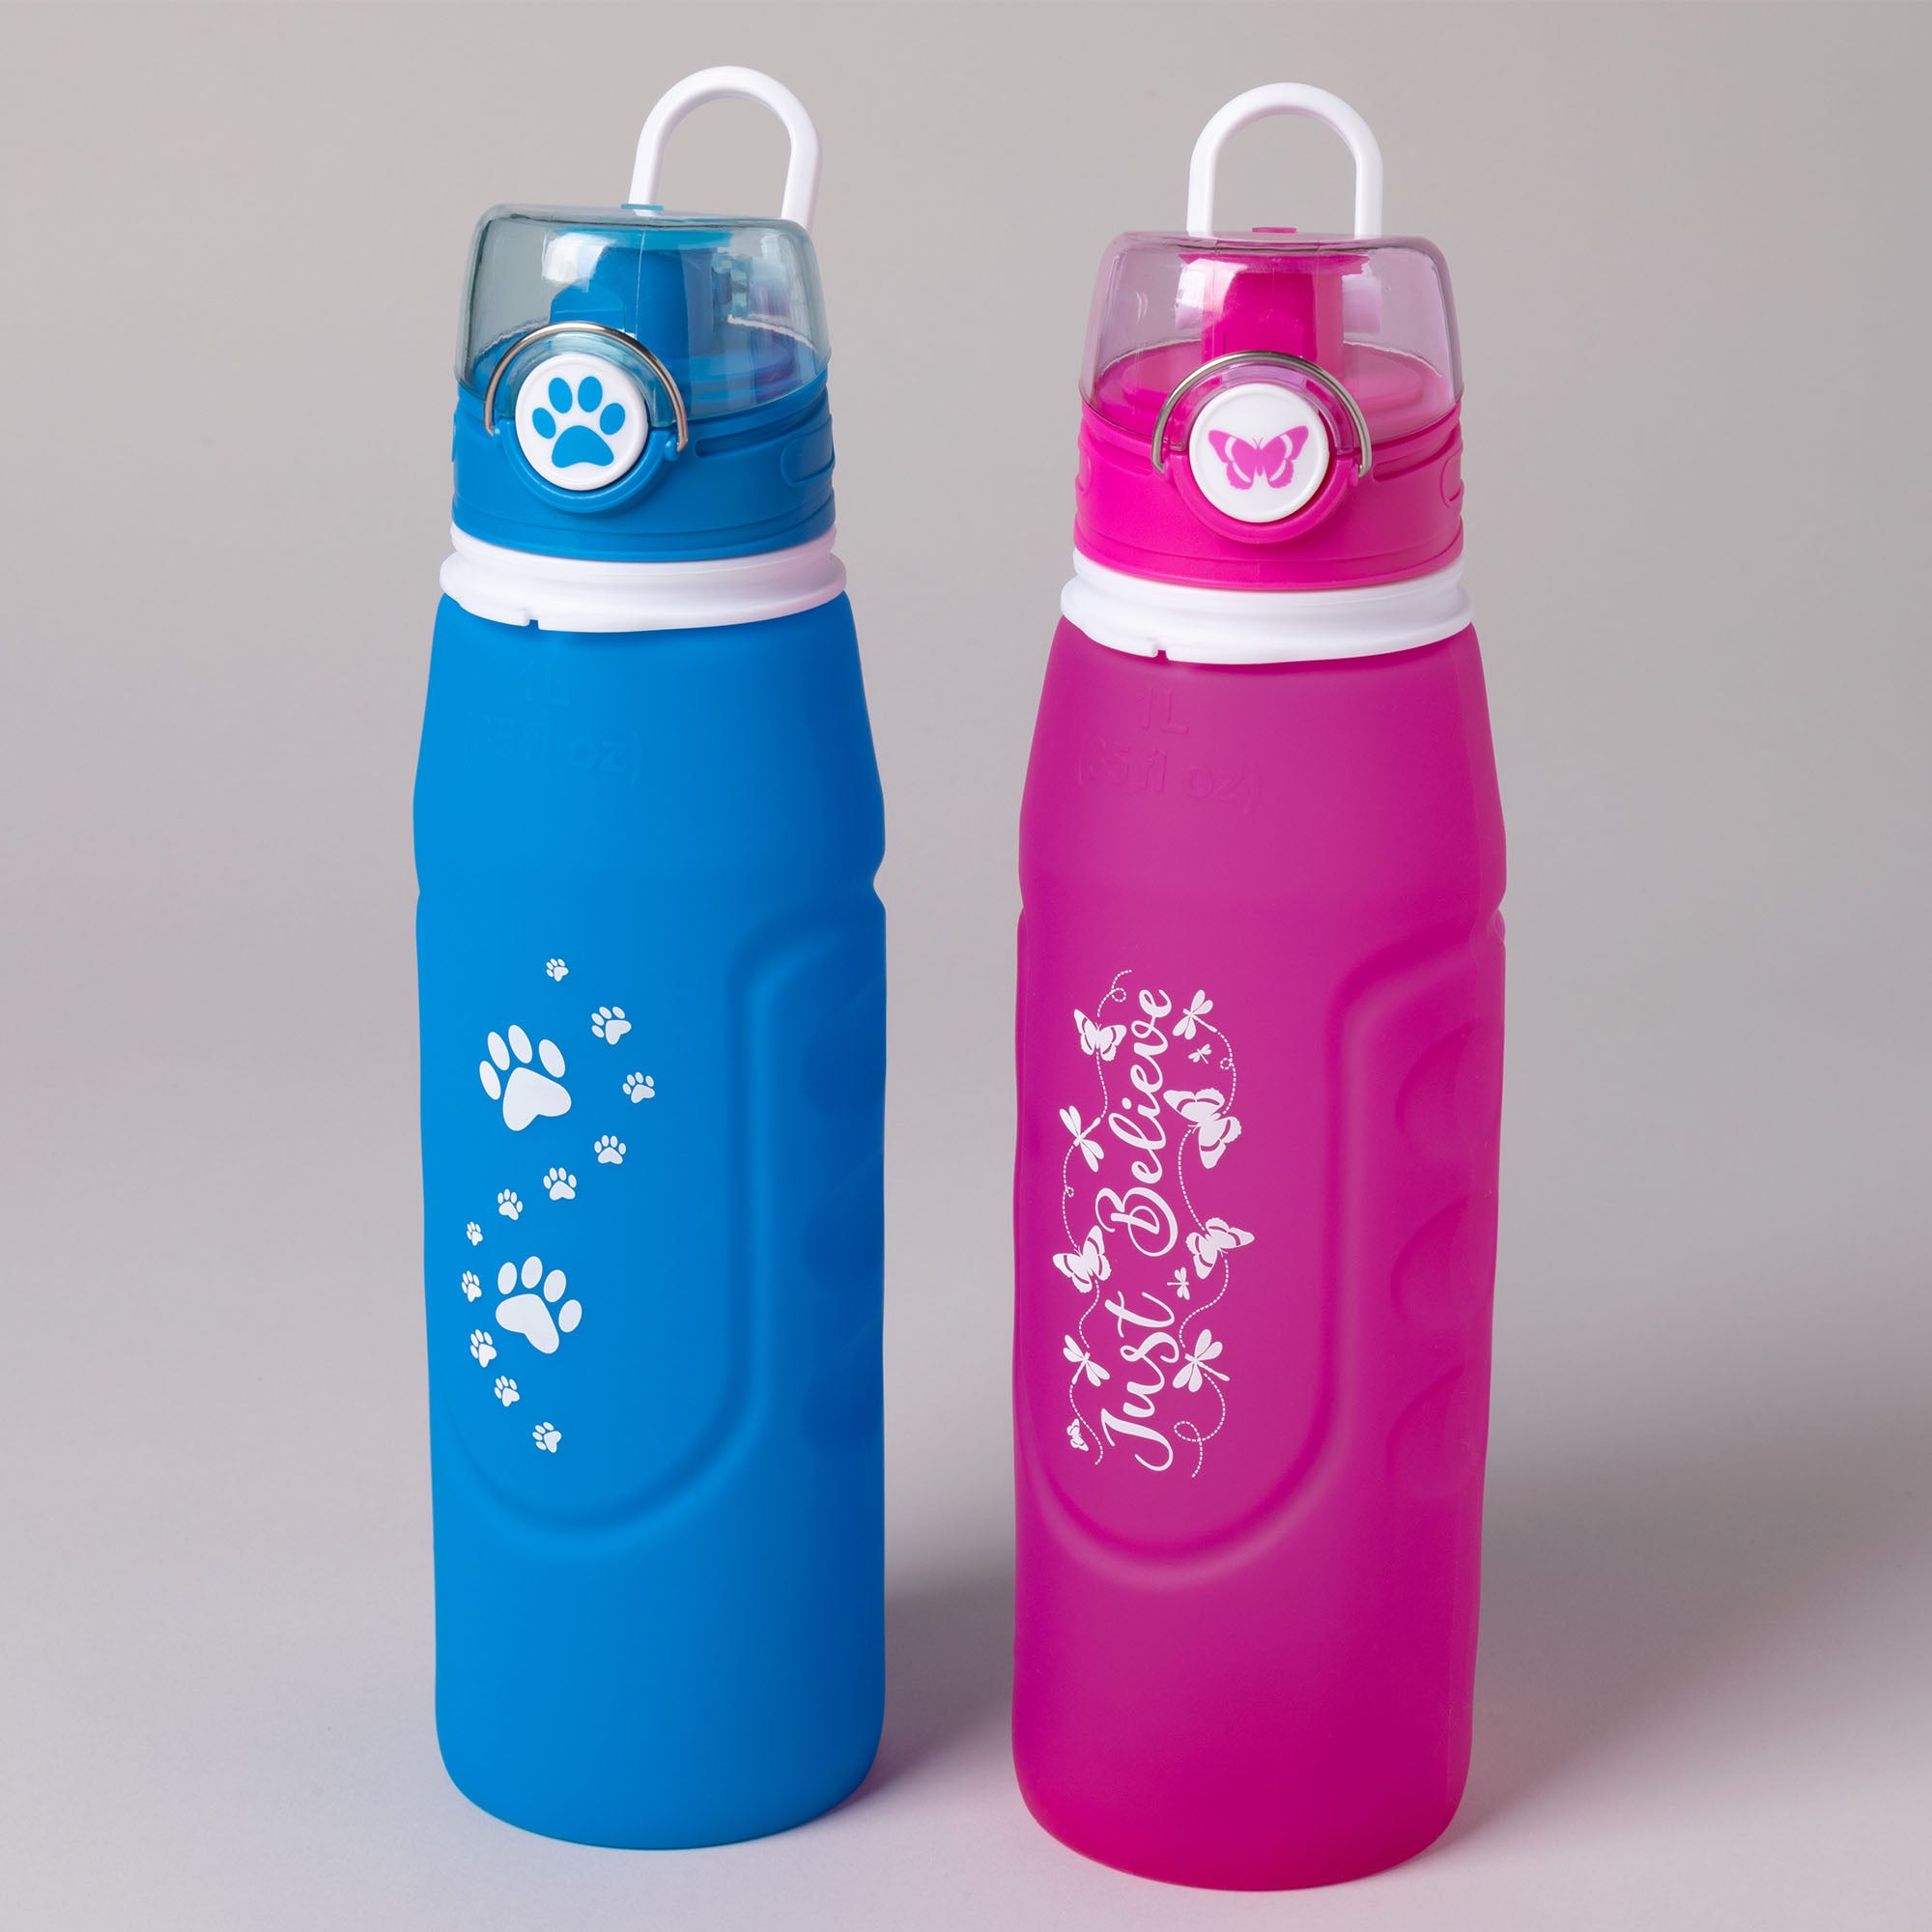 HydroGood Collapsible Silicone Water Bottle - Blue Walking Paws